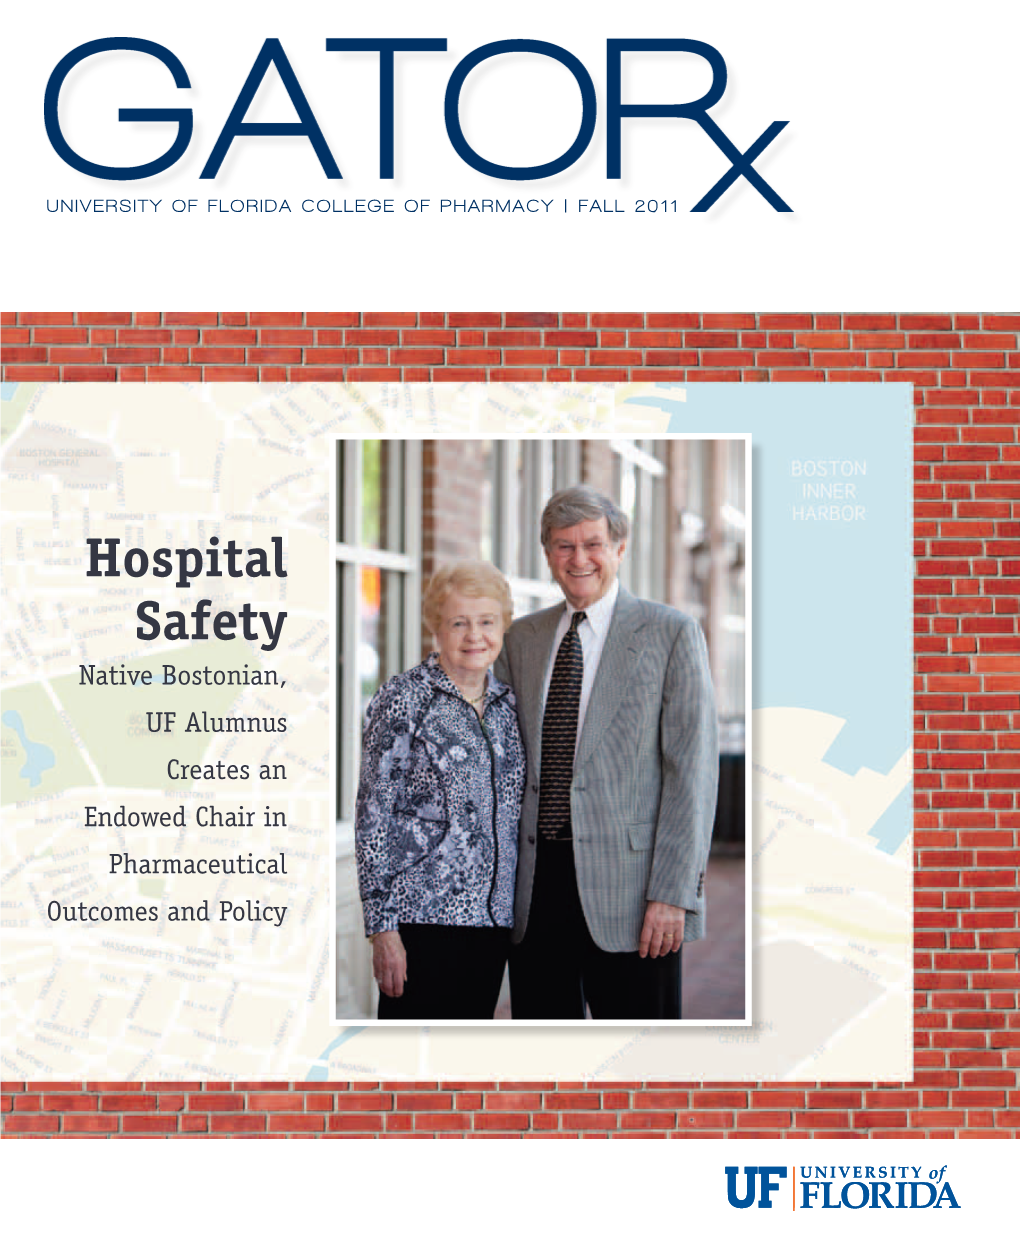 Hospital Safety Native Bostonian, UF Alumnus Creates an Endowed Chair in Pharmaceutical Outcomes and Policy from the Dean